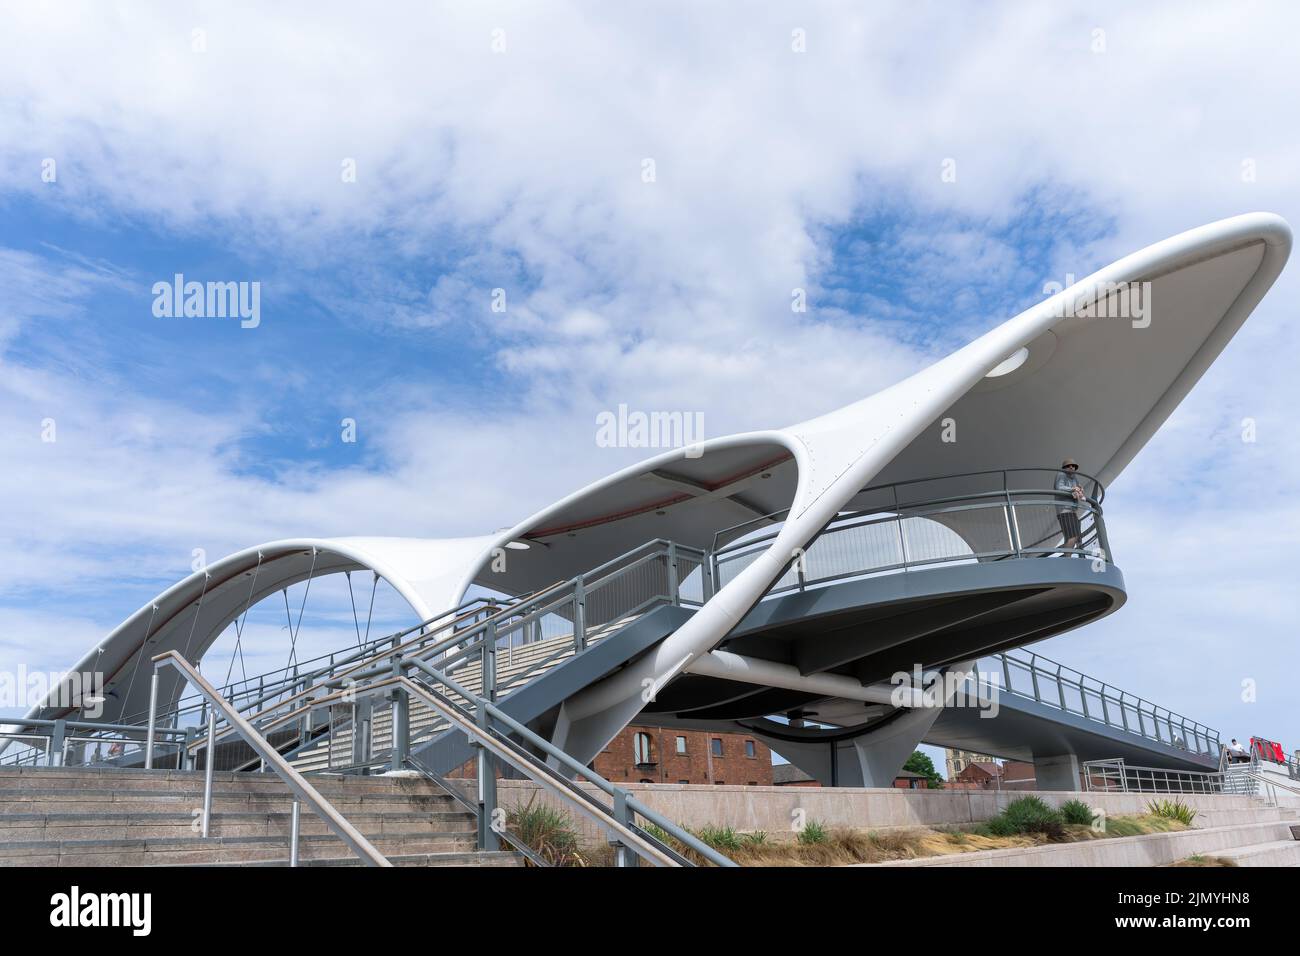 KINGSTON UPON HULL,  YORKSHIRE, UK - JULY 17: Murdoch's Connection footbridge by the marina in Kingston upon Hull on July 17, 20 Stock Photo